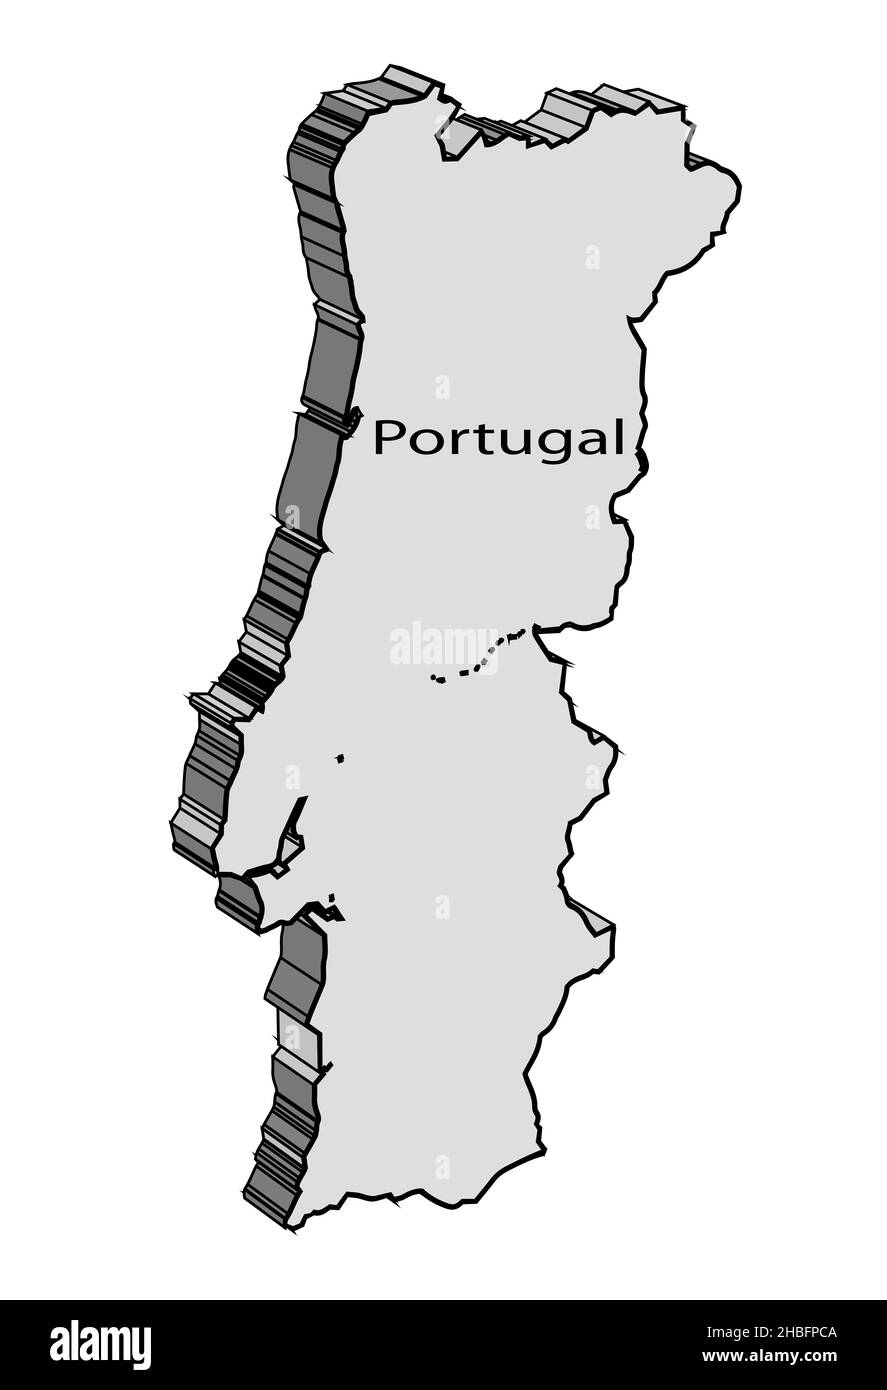 Portugal Outline Silhouette Map Illustration. Royalty Free SVG, Cliparts,  Vectors, and Stock Illustration. Image 75080313.